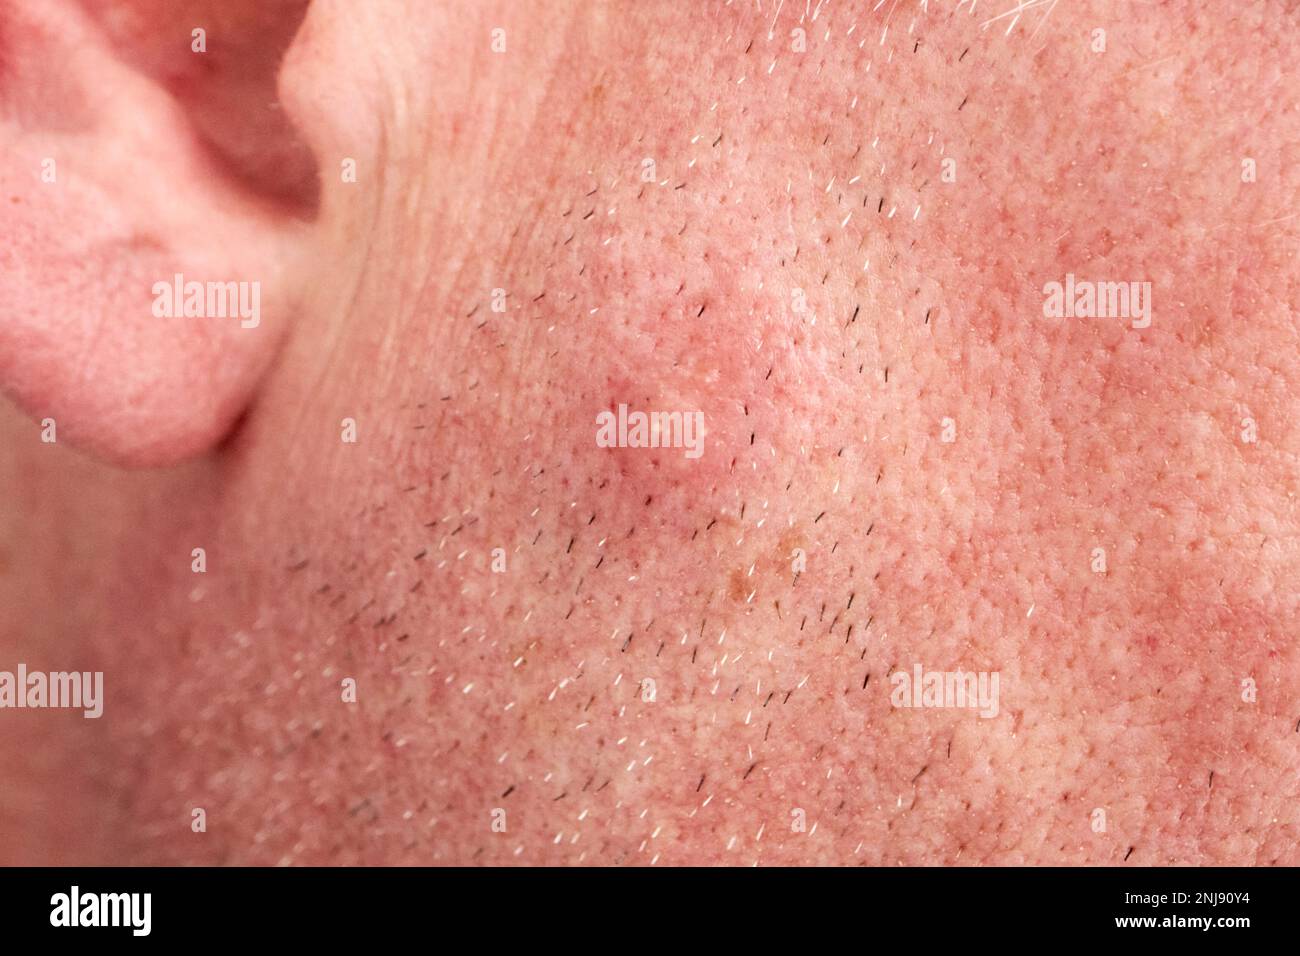 mosquito bite swollen up on the side of a mans face Lanzarote, Canary Islands, Spain Stock Photo